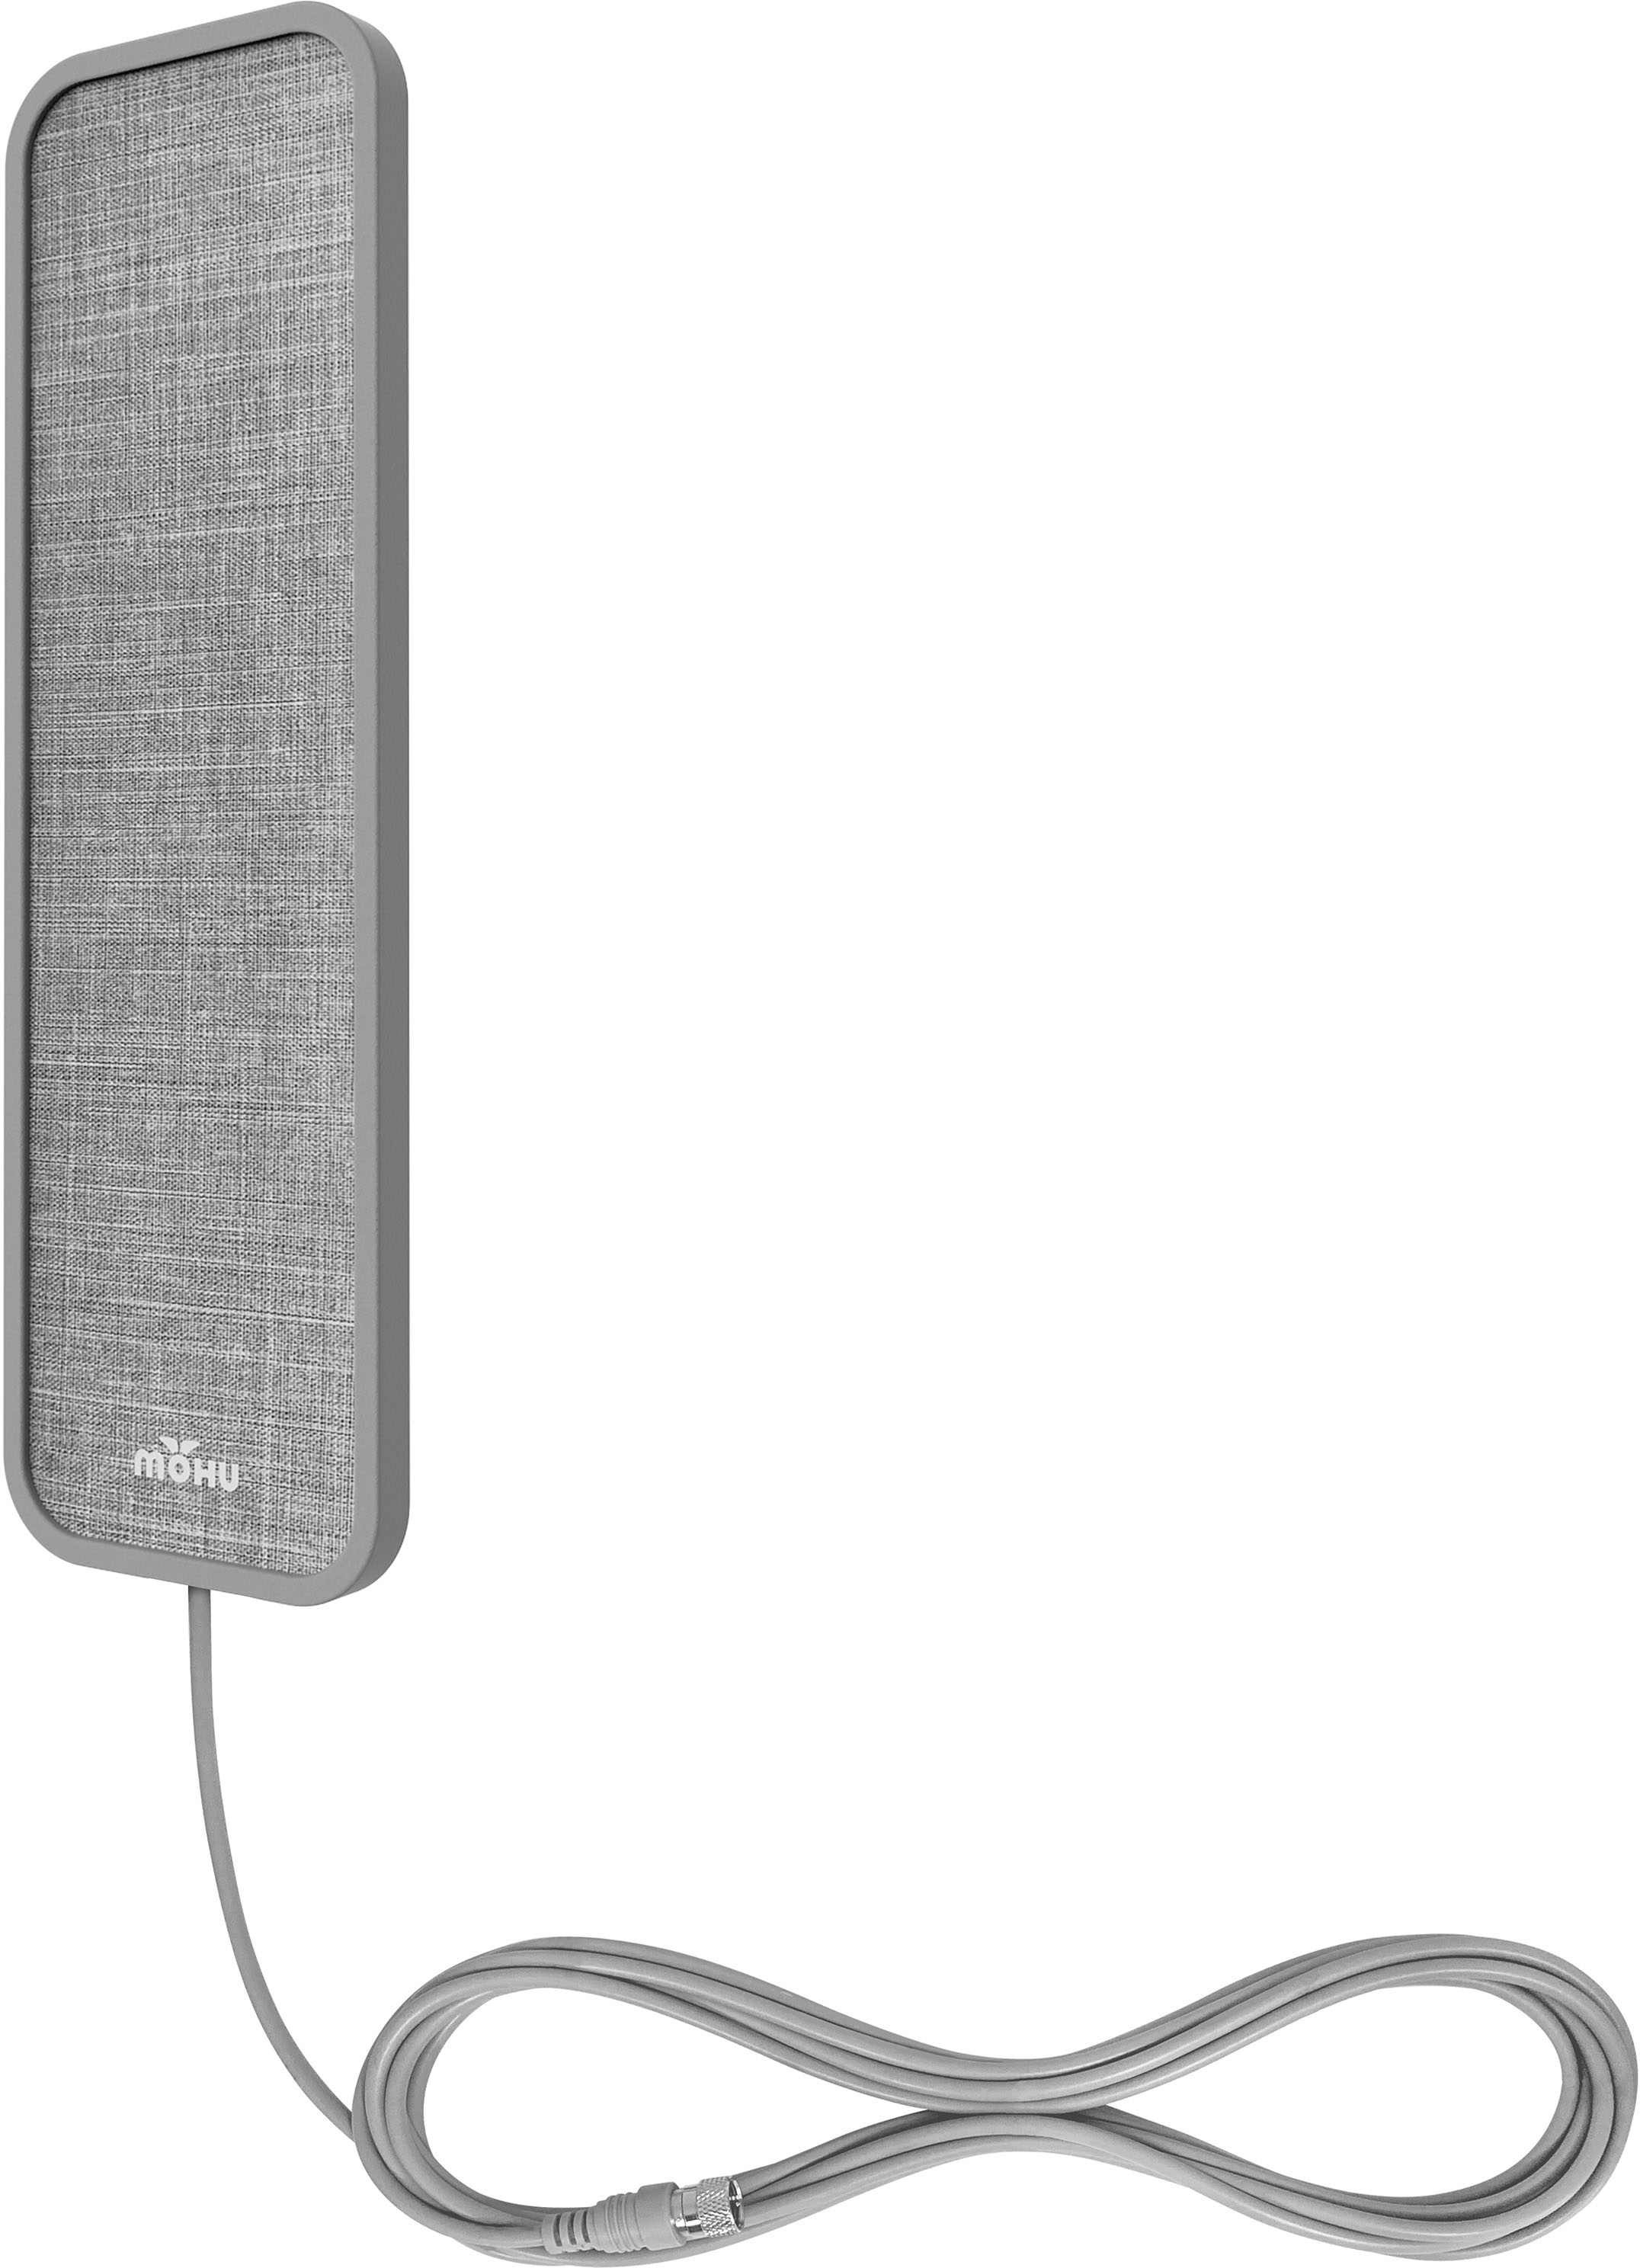 Angle View: Mohu - Vibe Amplified Indoor HDTV Antenna 50-Mile Range - Gray Tweed